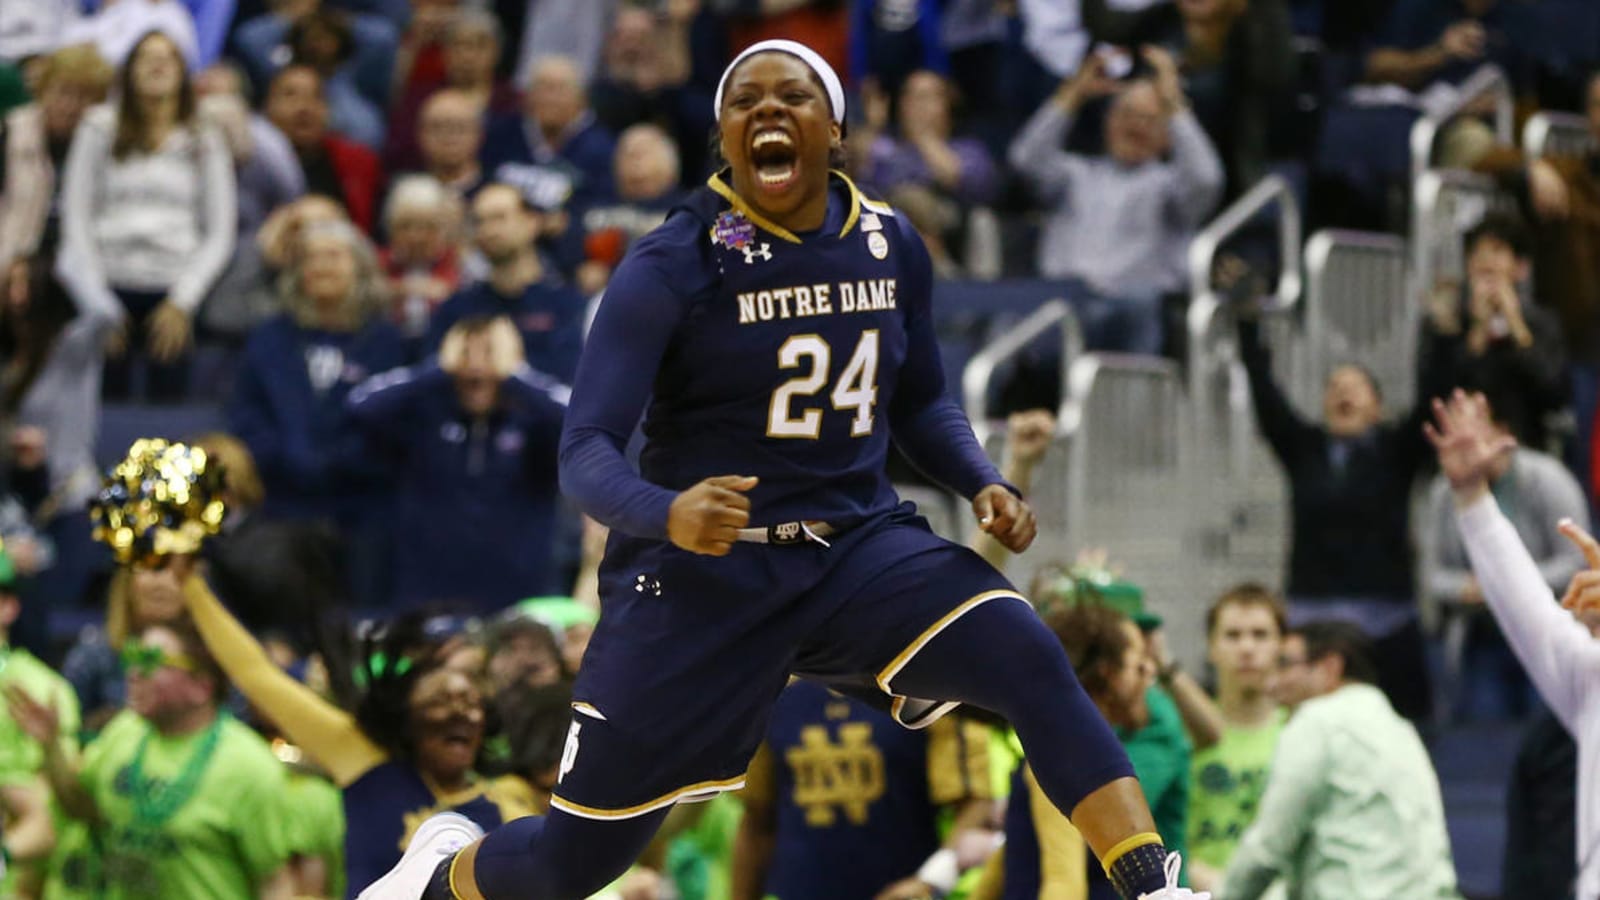 Rule change gives top seed in NCAA women's tourney most rest for